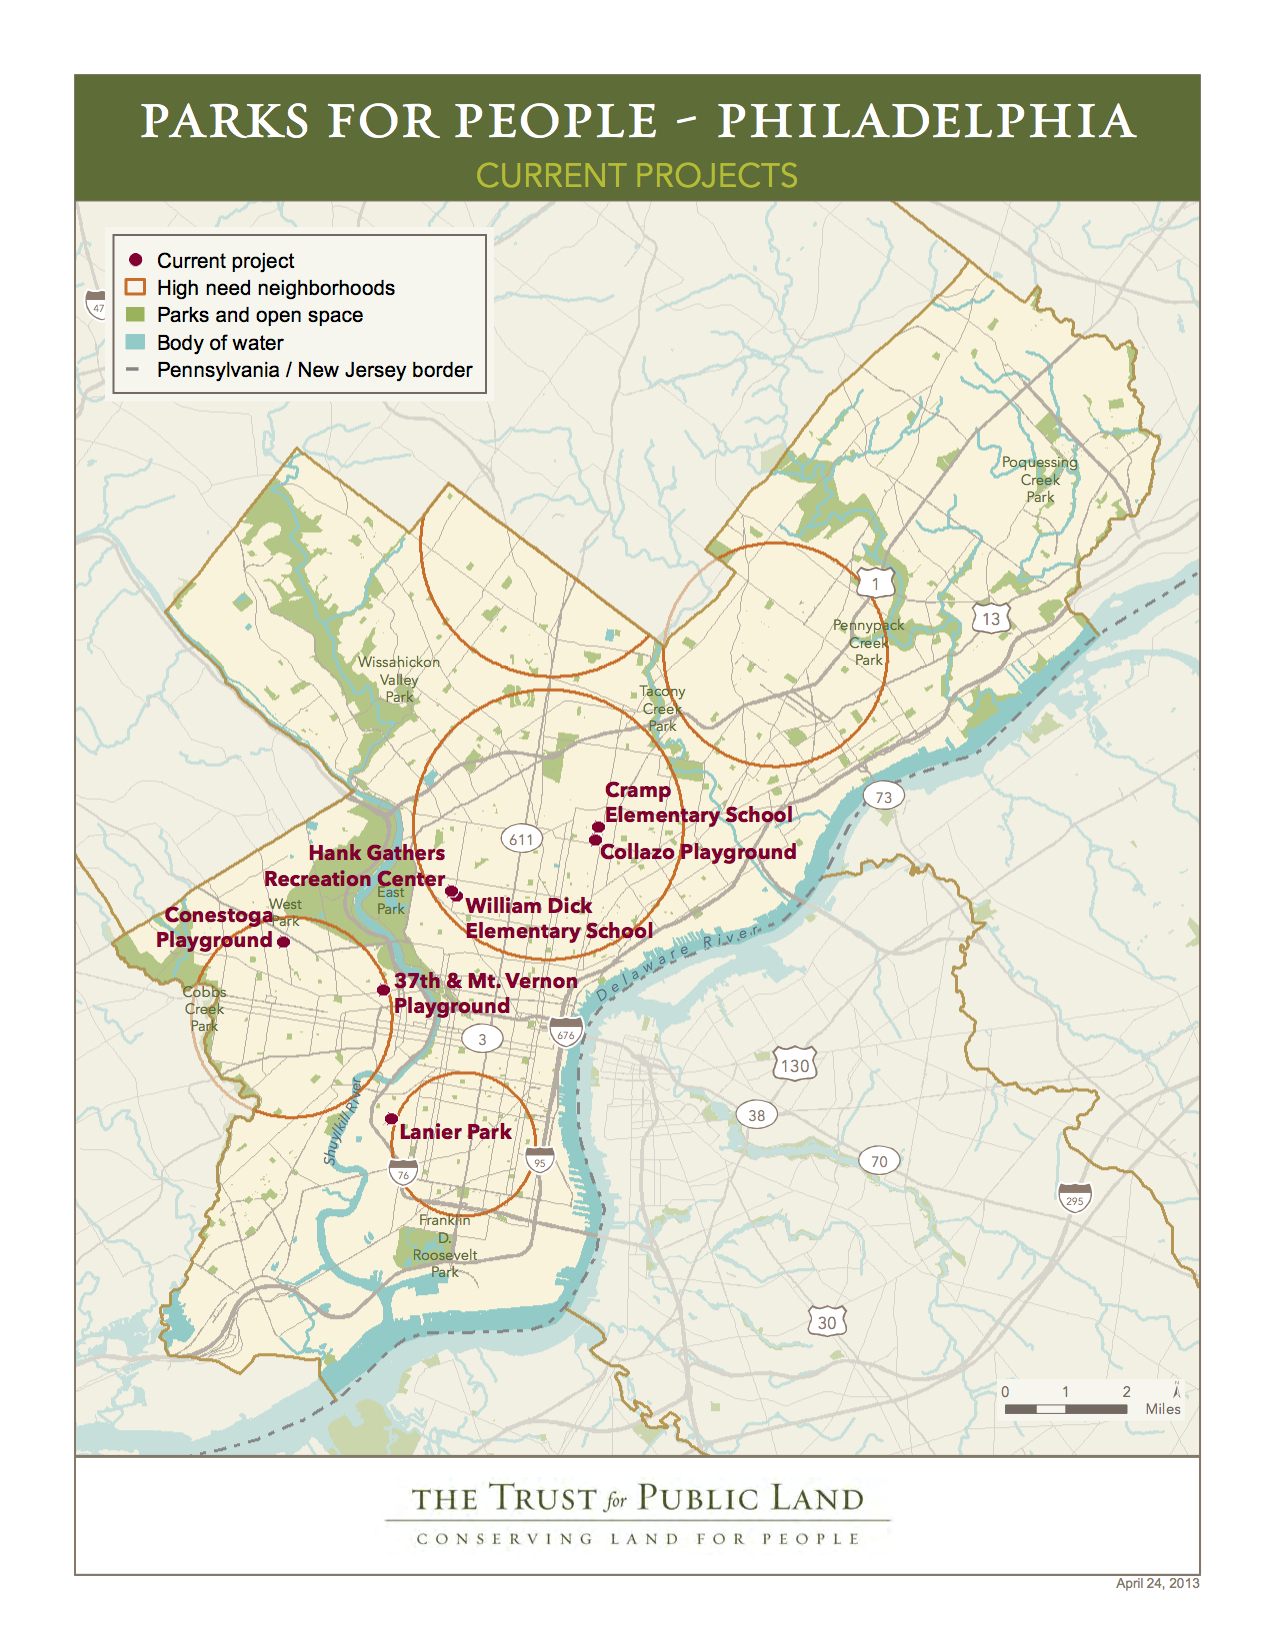 This map shows the projects Parks & Rec and Trust for Public Land are currently partnering on